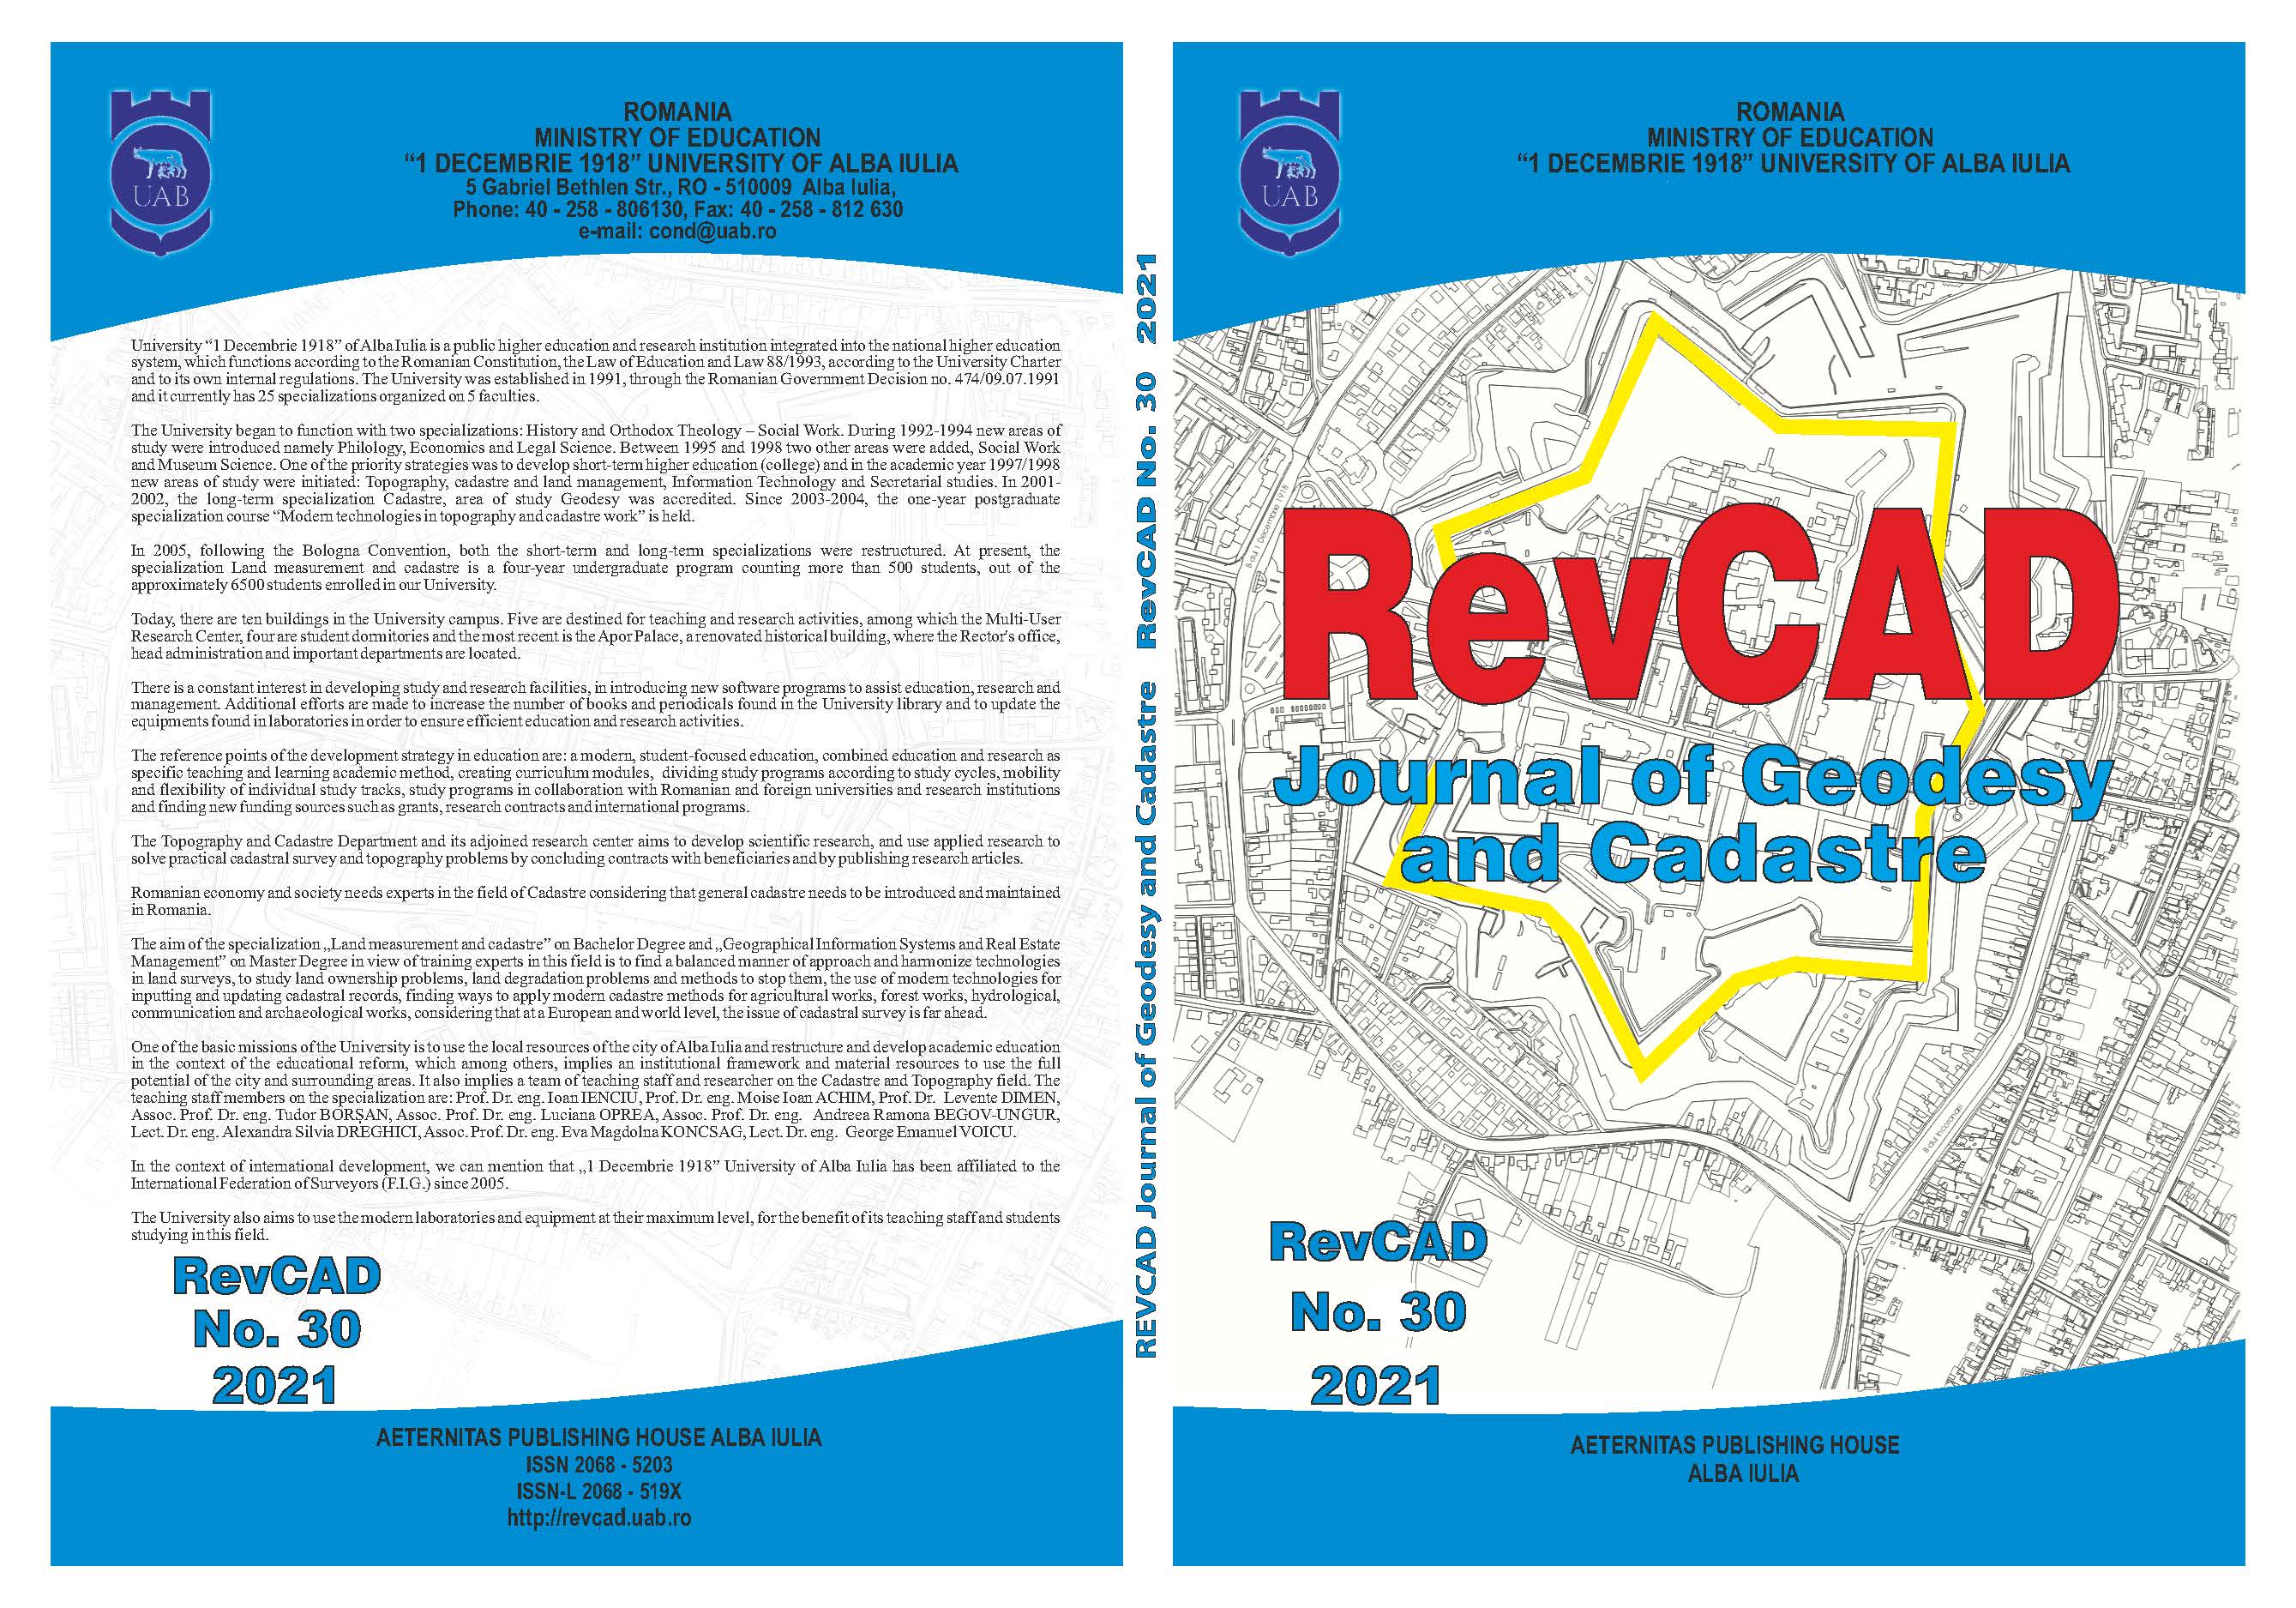 Topo-Cadastral Works Carried Out in View of the Cadastral Plan Corresponding to the Cadastral Sector Number 108 from the Village of Săliștea, Alba County Cover Image